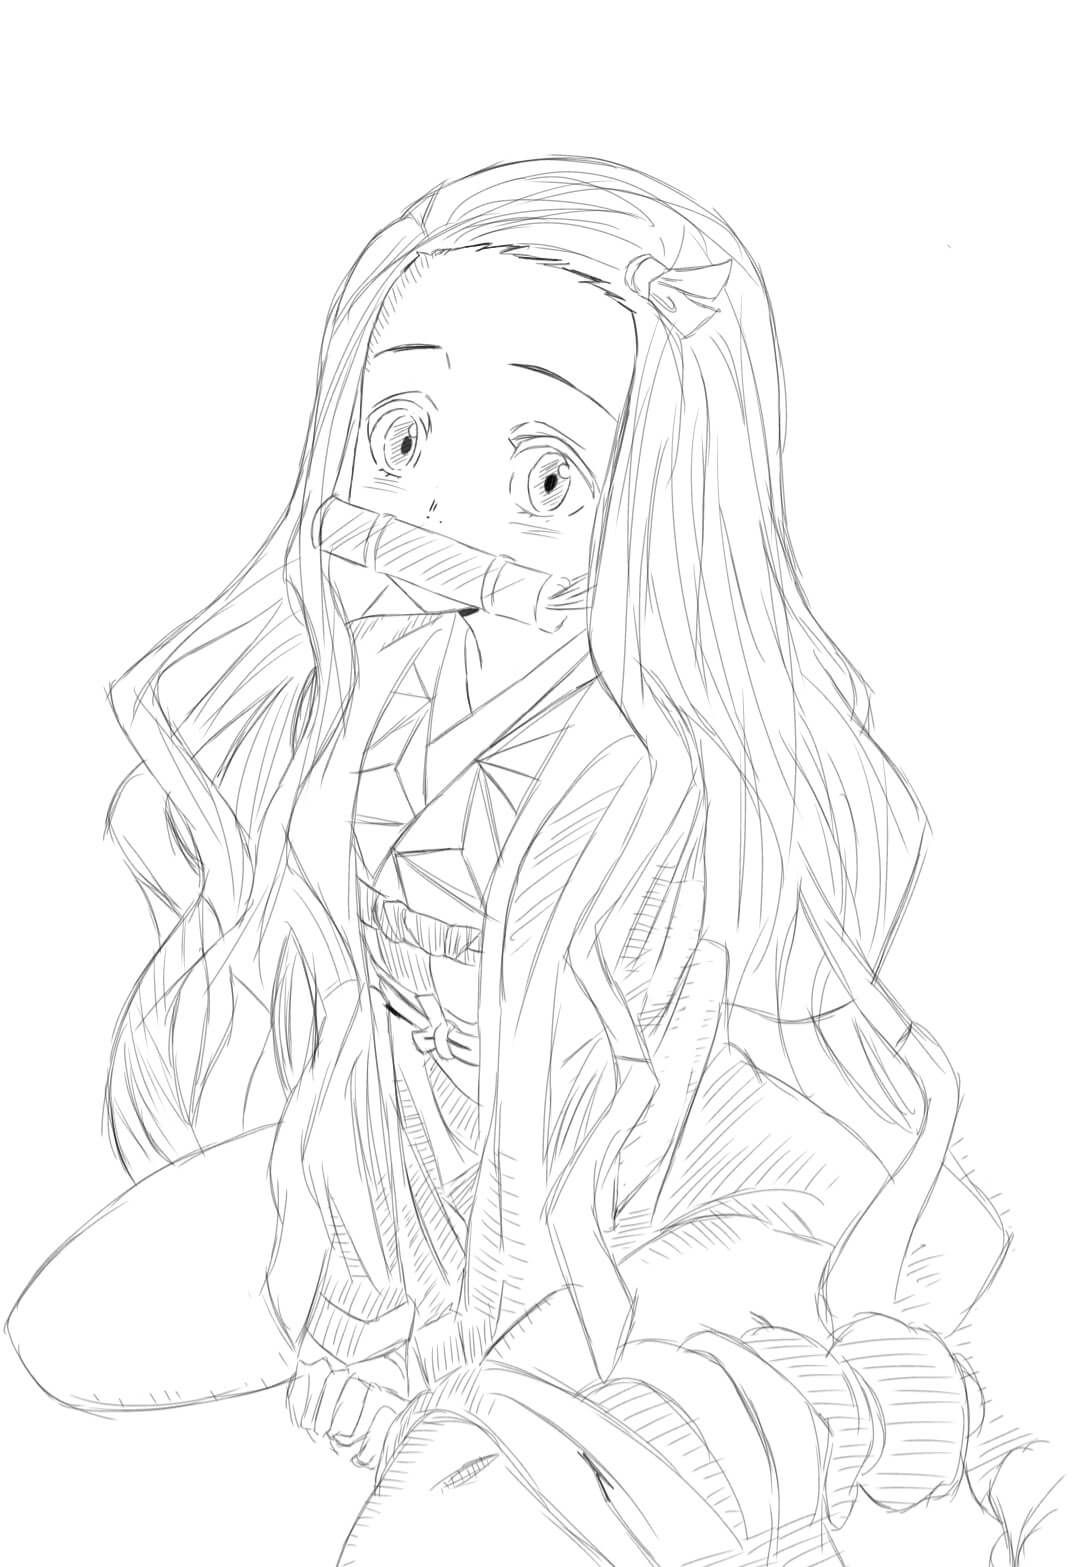 Download or print this amazing coloring page printable nezuko kamado coloring pages